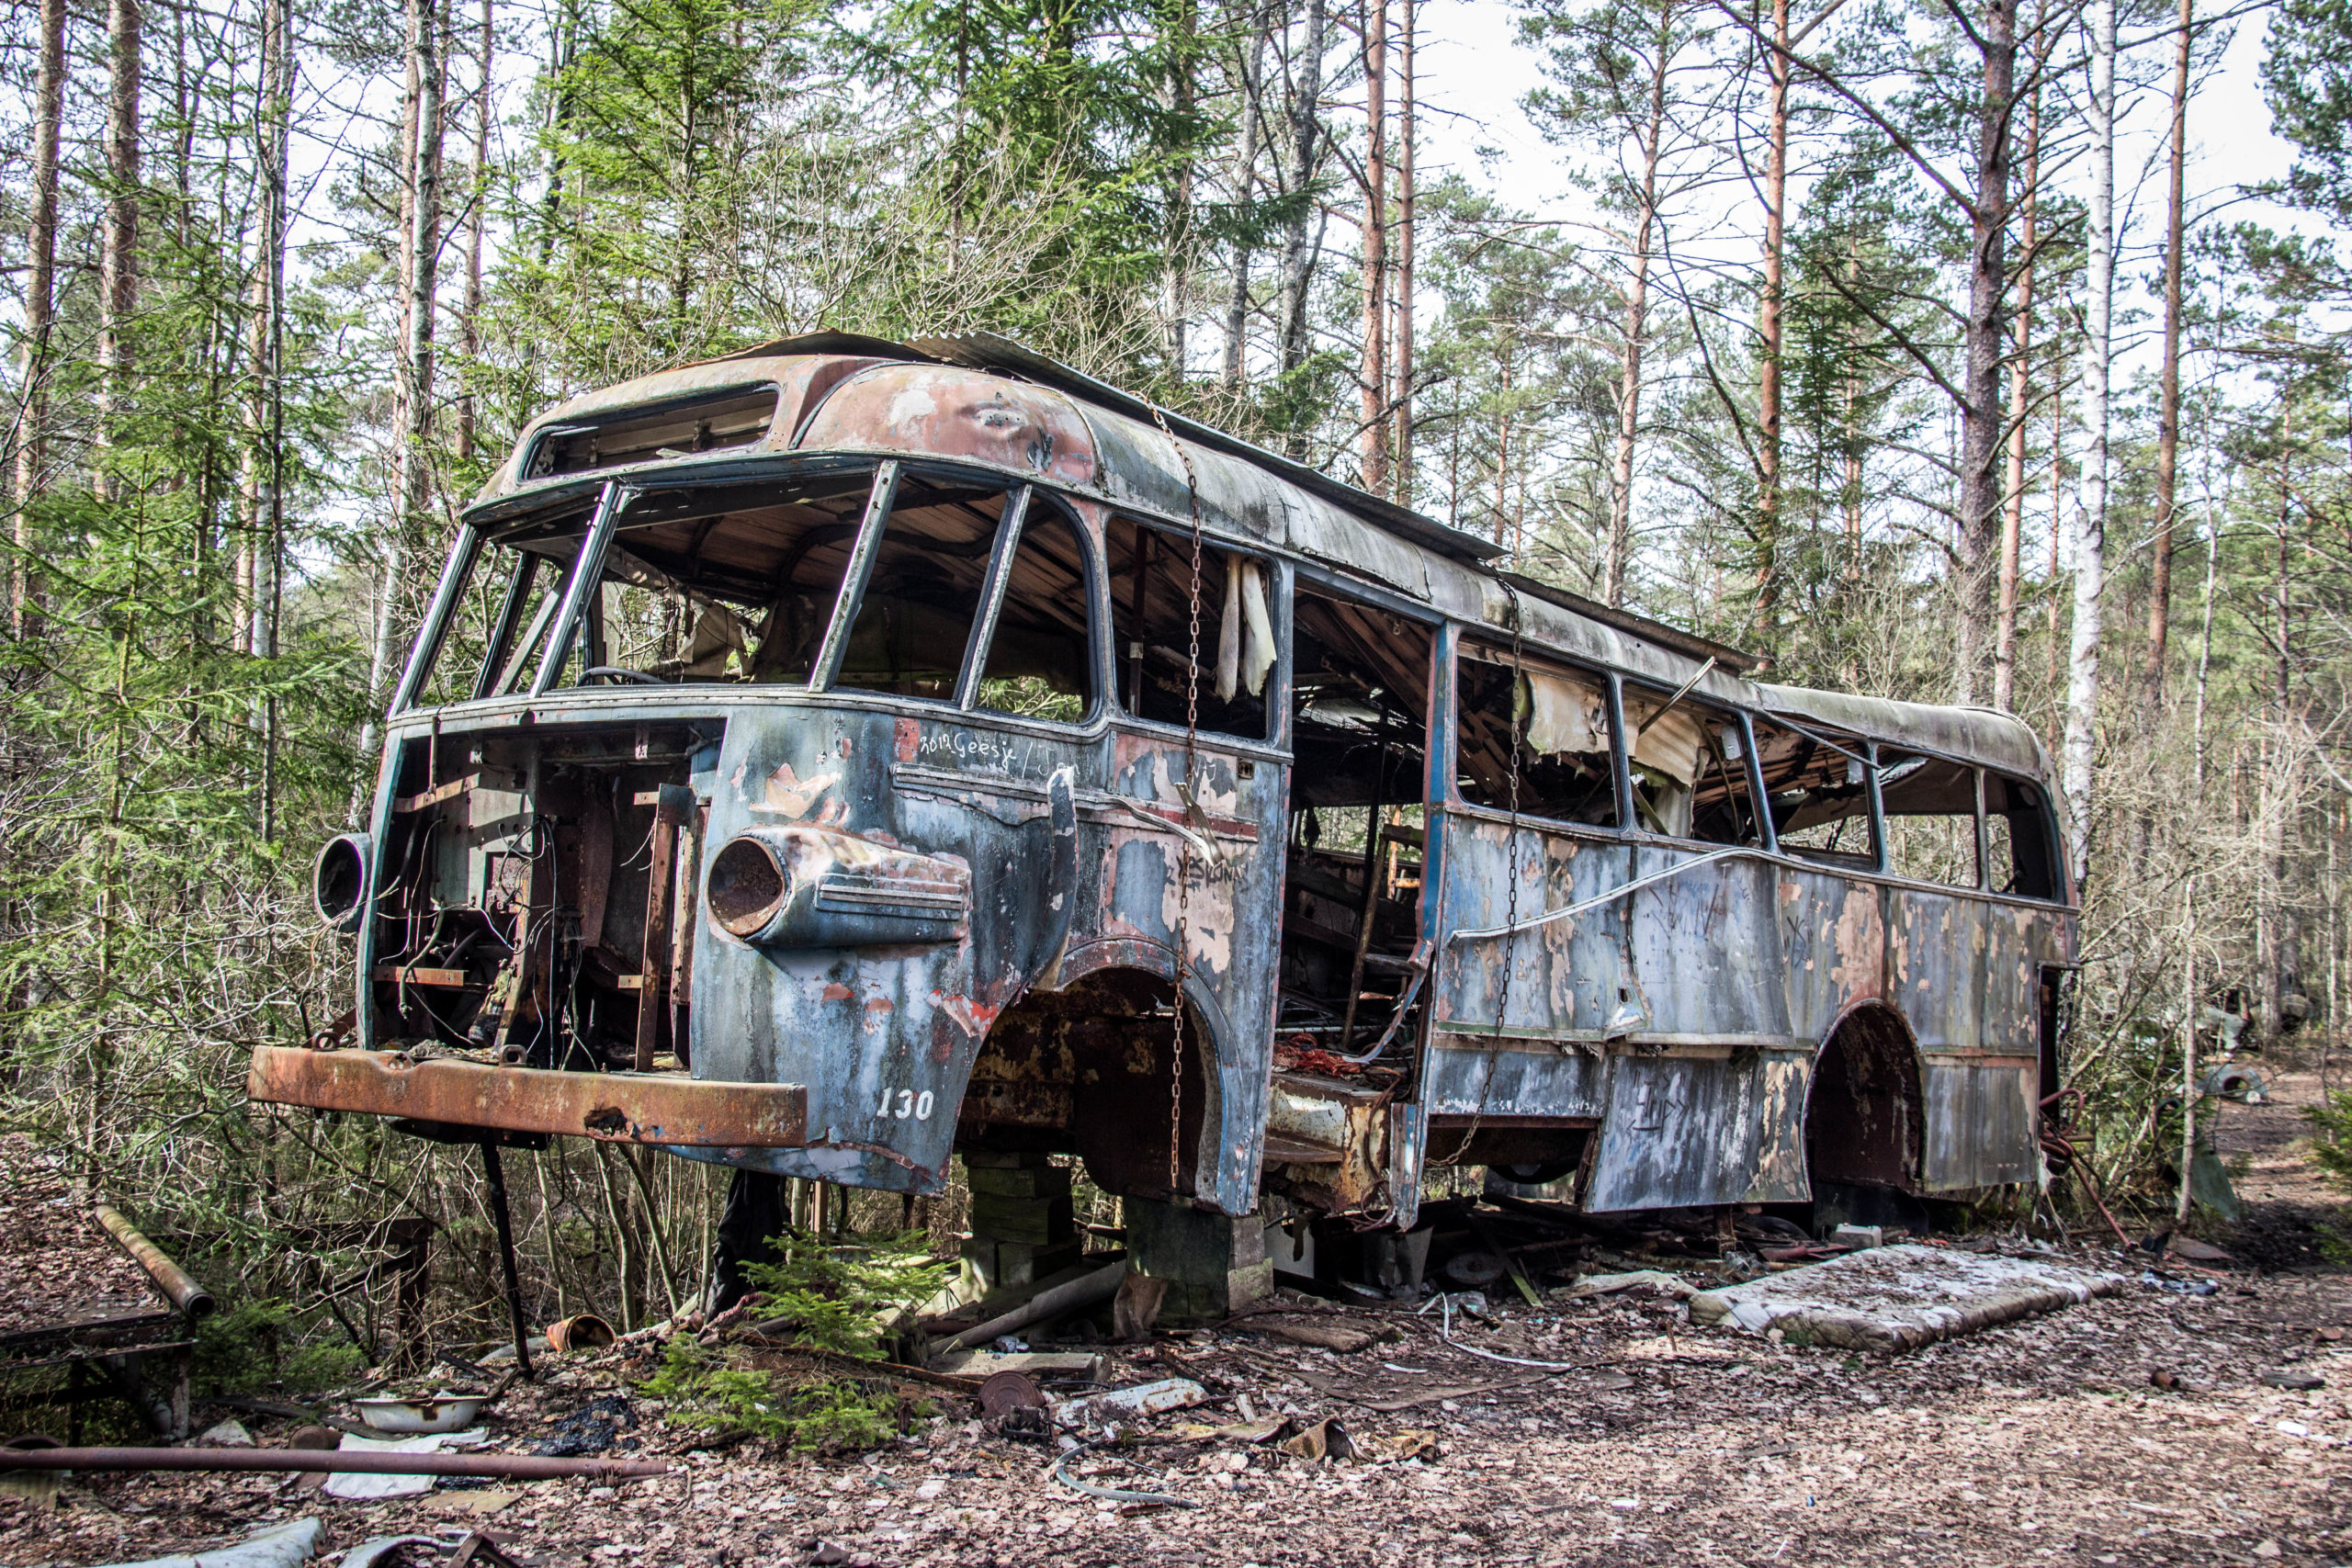 remains of a public transit bus in the woods.